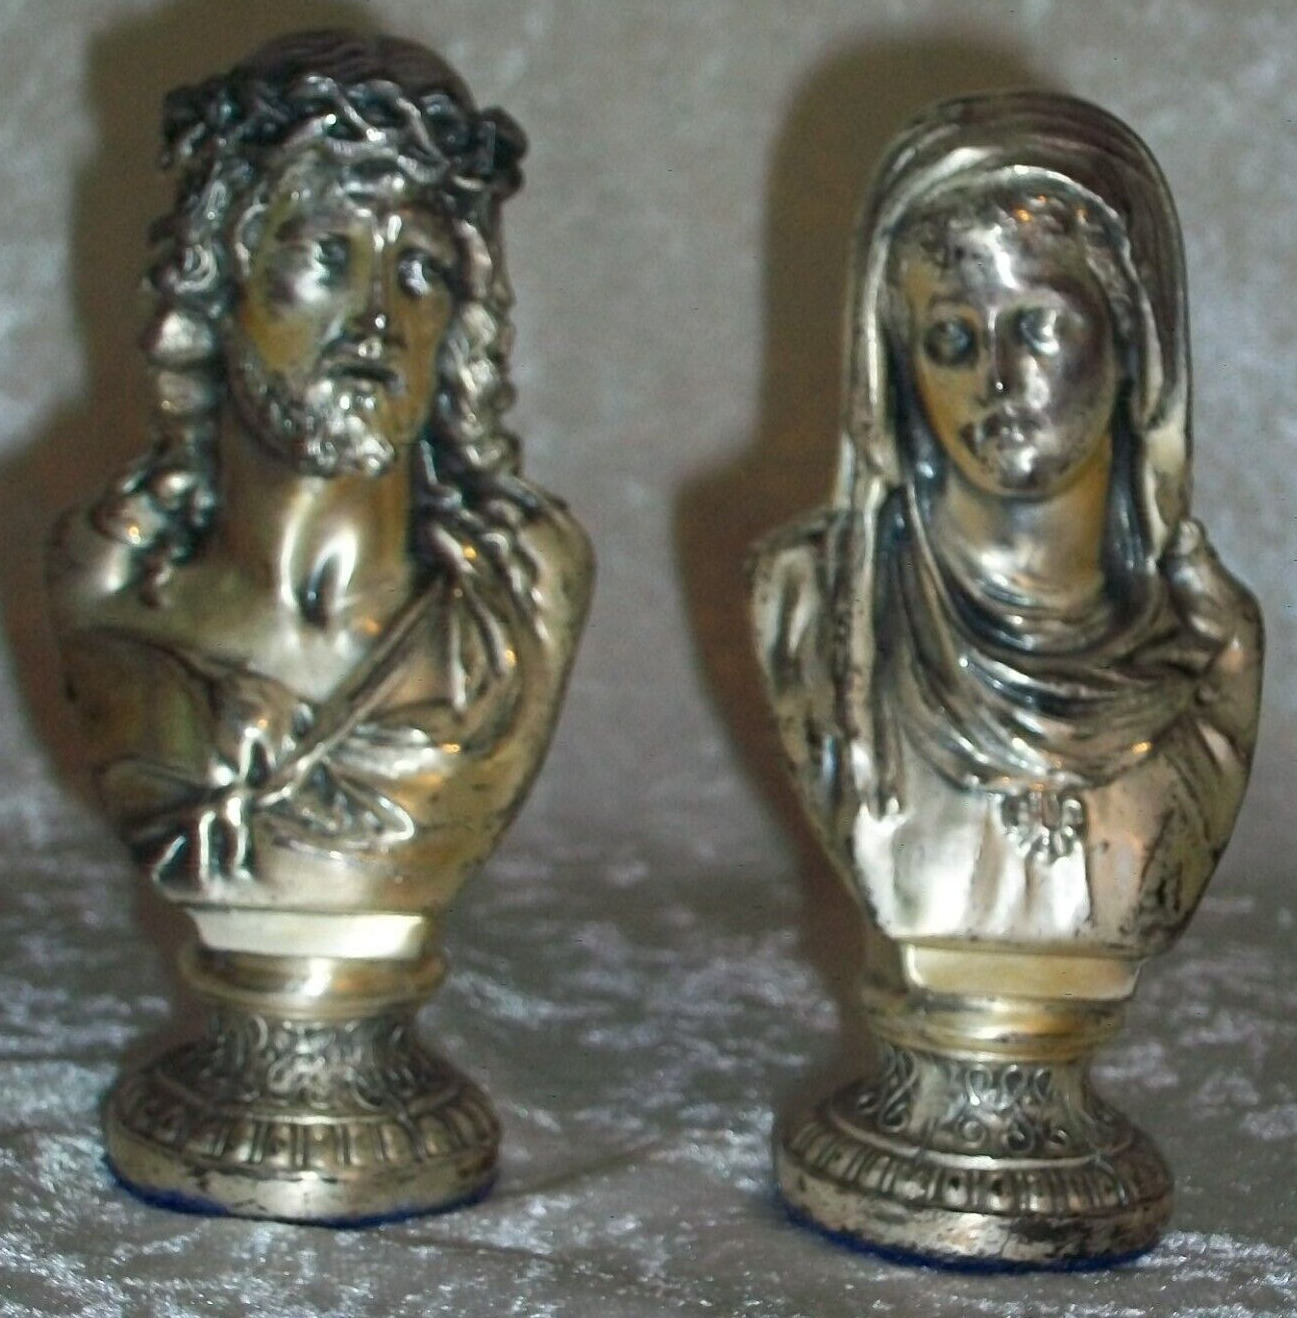 Vintage Jennings Brothers Gothic Worn Silver Plate Mother Mary Jesus Figurines